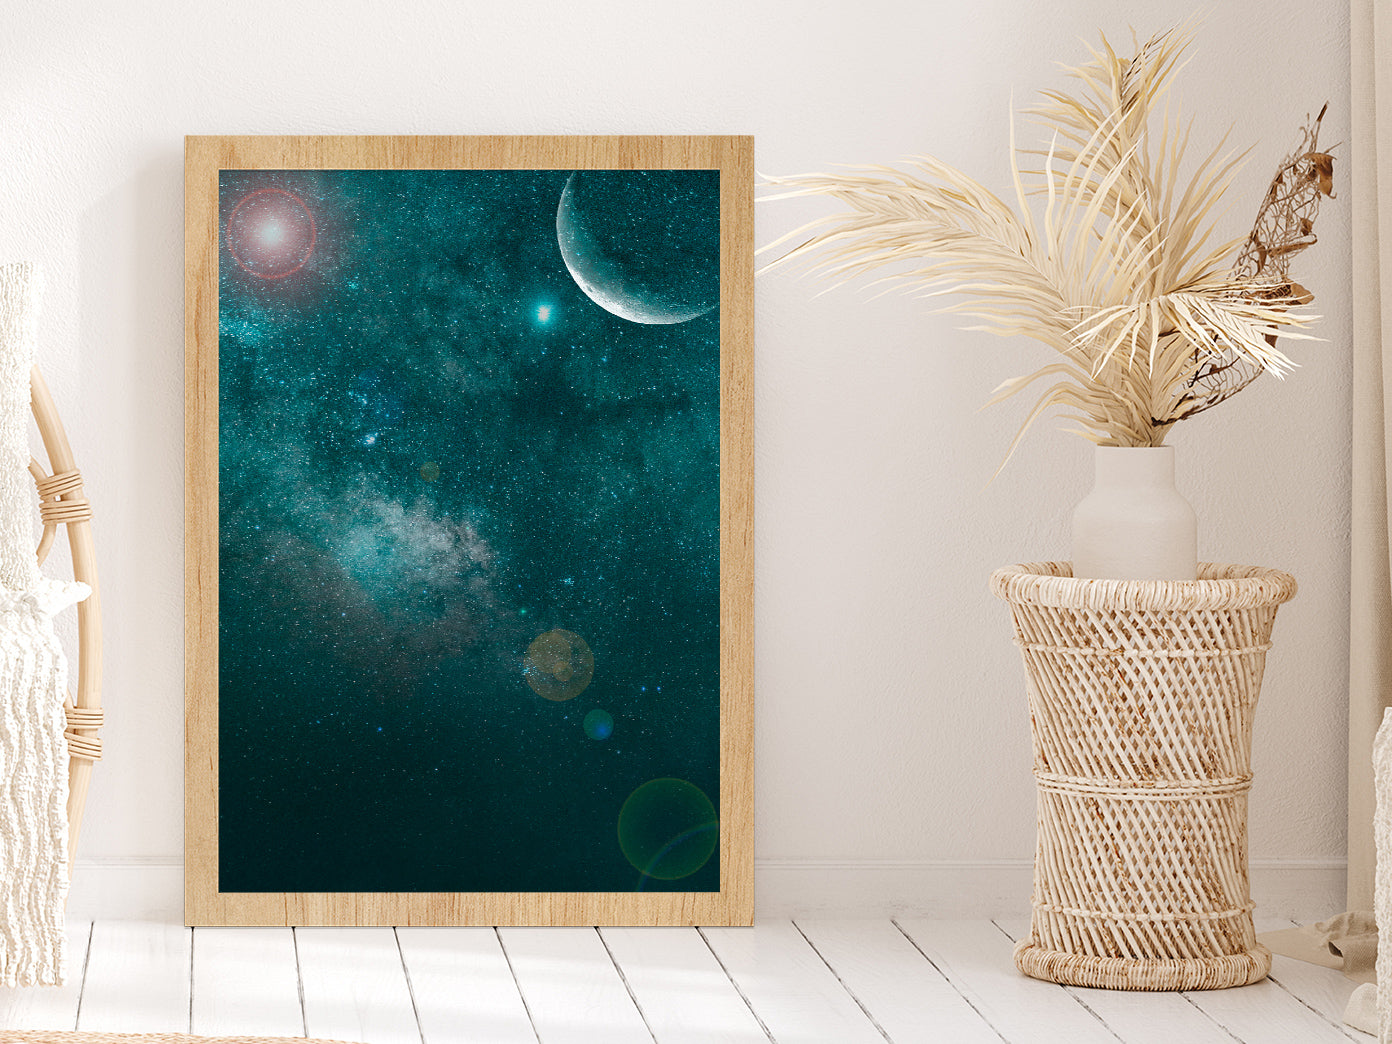 Milky Way Night Sky Clouds & Moon Glass Framed Wall Art, Ready to Hang Quality Print Without White Border Oak